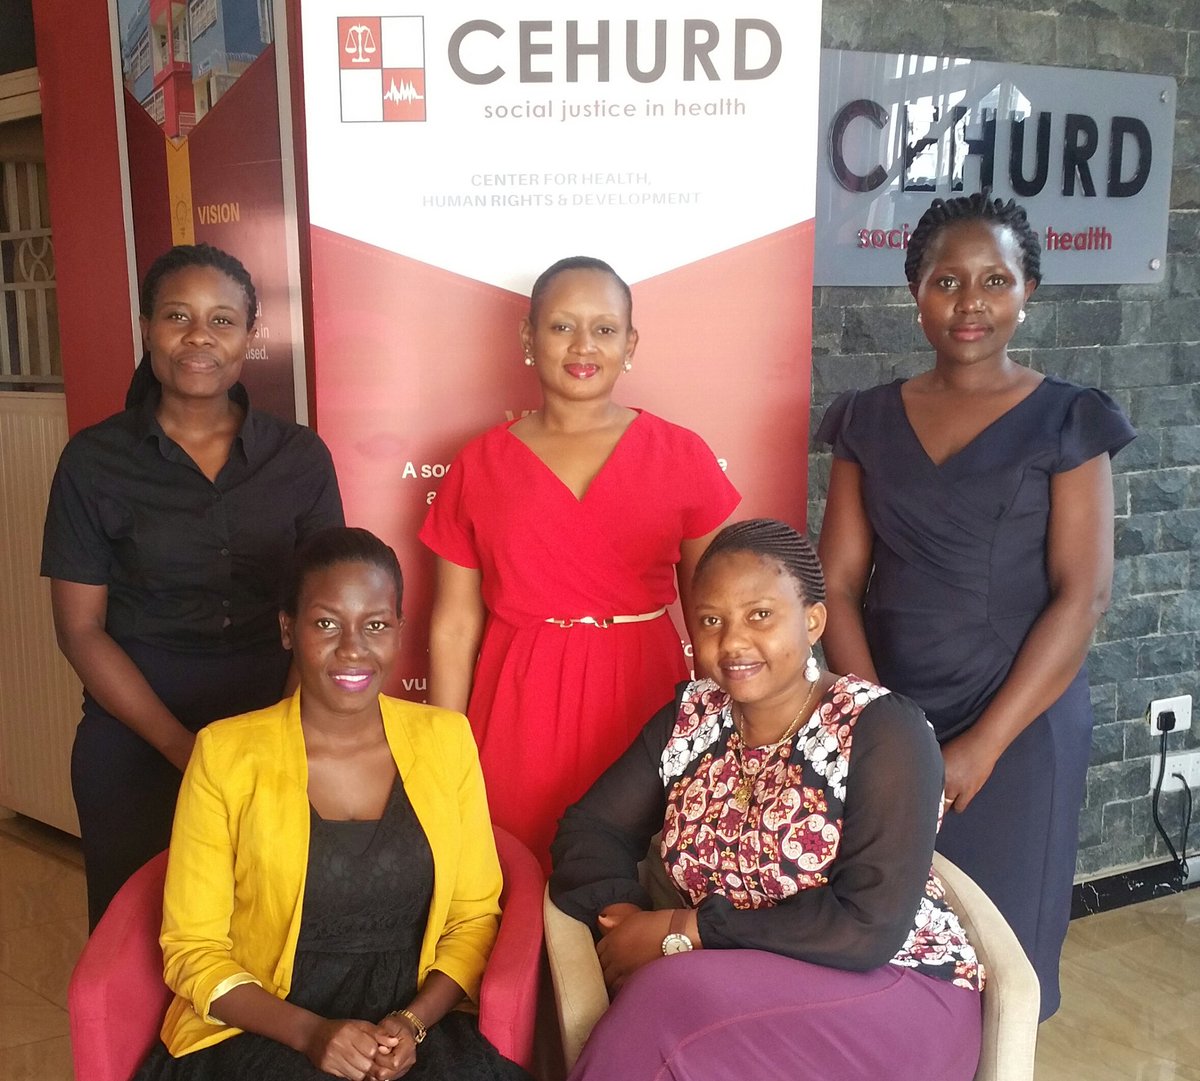 The LASPNET FGGII project team met with @cehurduganda to agree on advocacy strategies for an ongoing case. Justice delayed is justice denied for any victim. #HealthRights #accesstojustice #Legalaid #Corporateaccountability @actionaiduganda